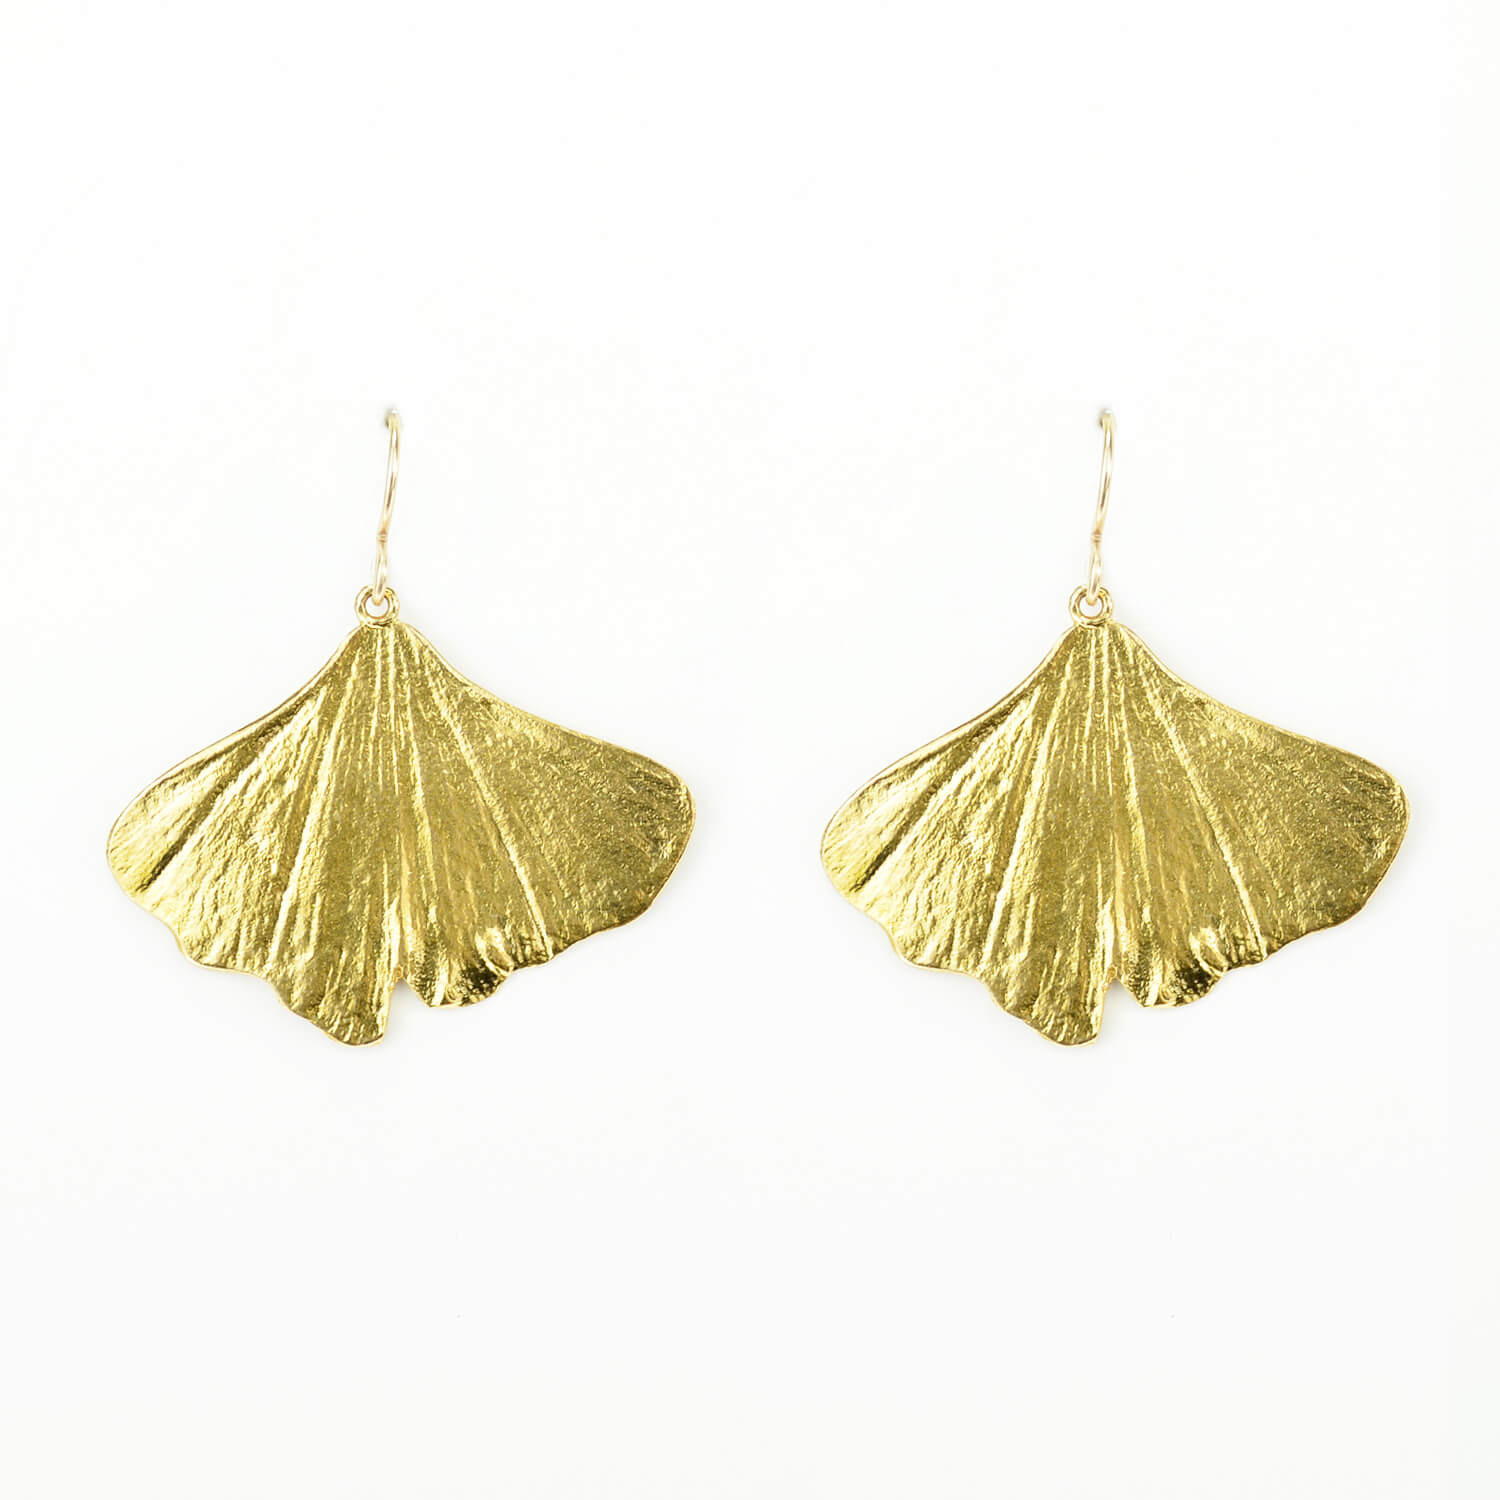 beautiful pair of golden ginkgo earrings on a white background 